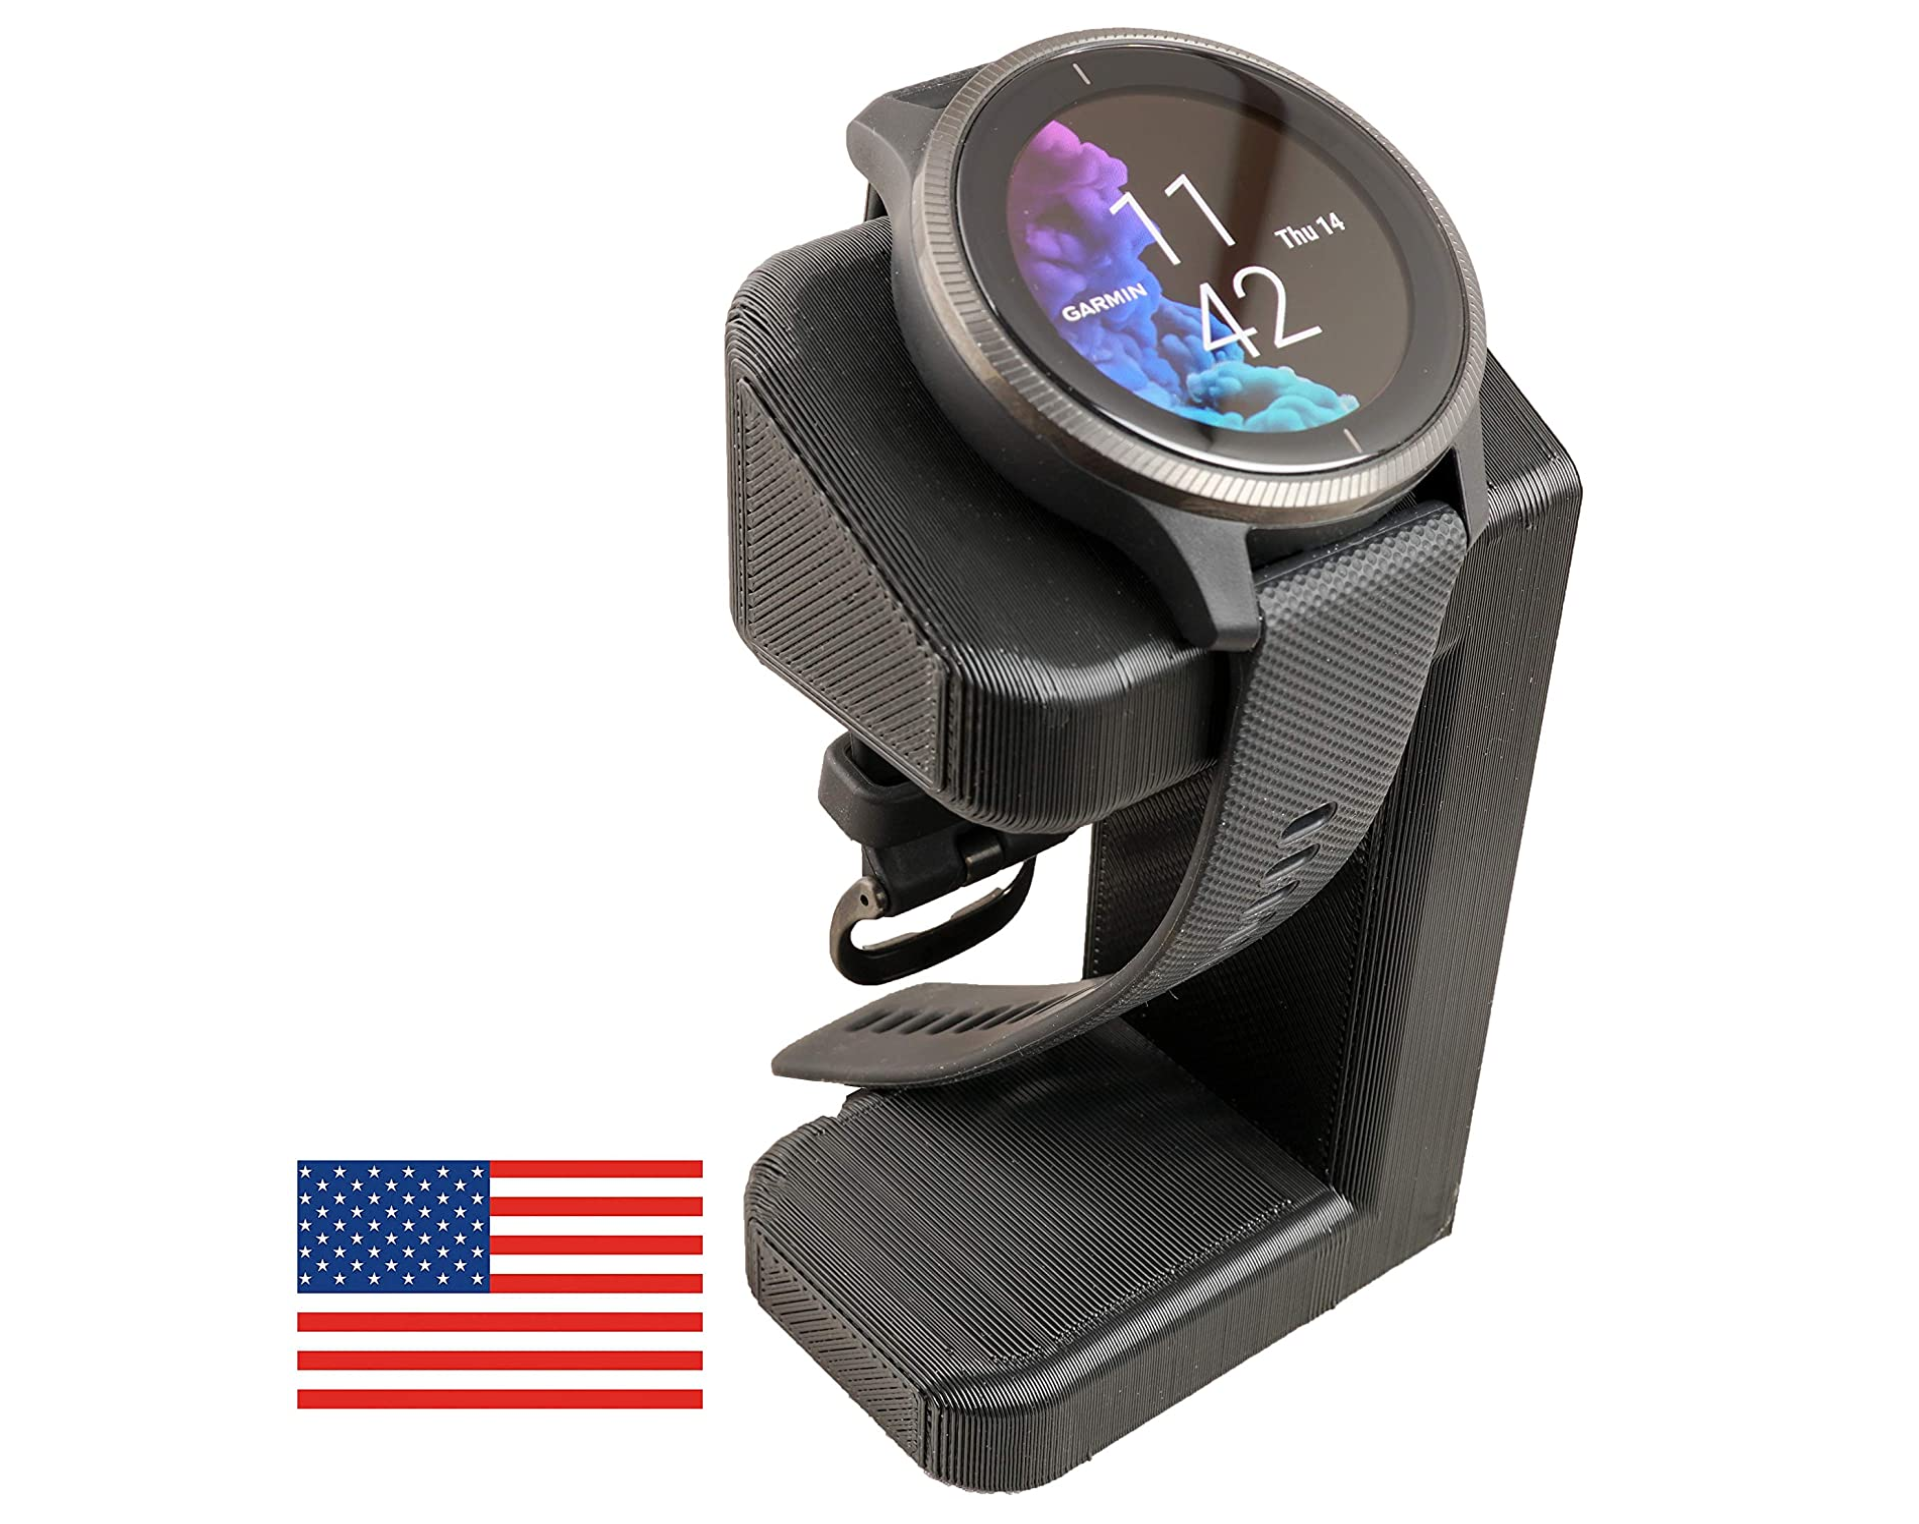 Louis Vuitton Tambour 1 and 2 Smartwatch Charging Stand (Headphone Mod